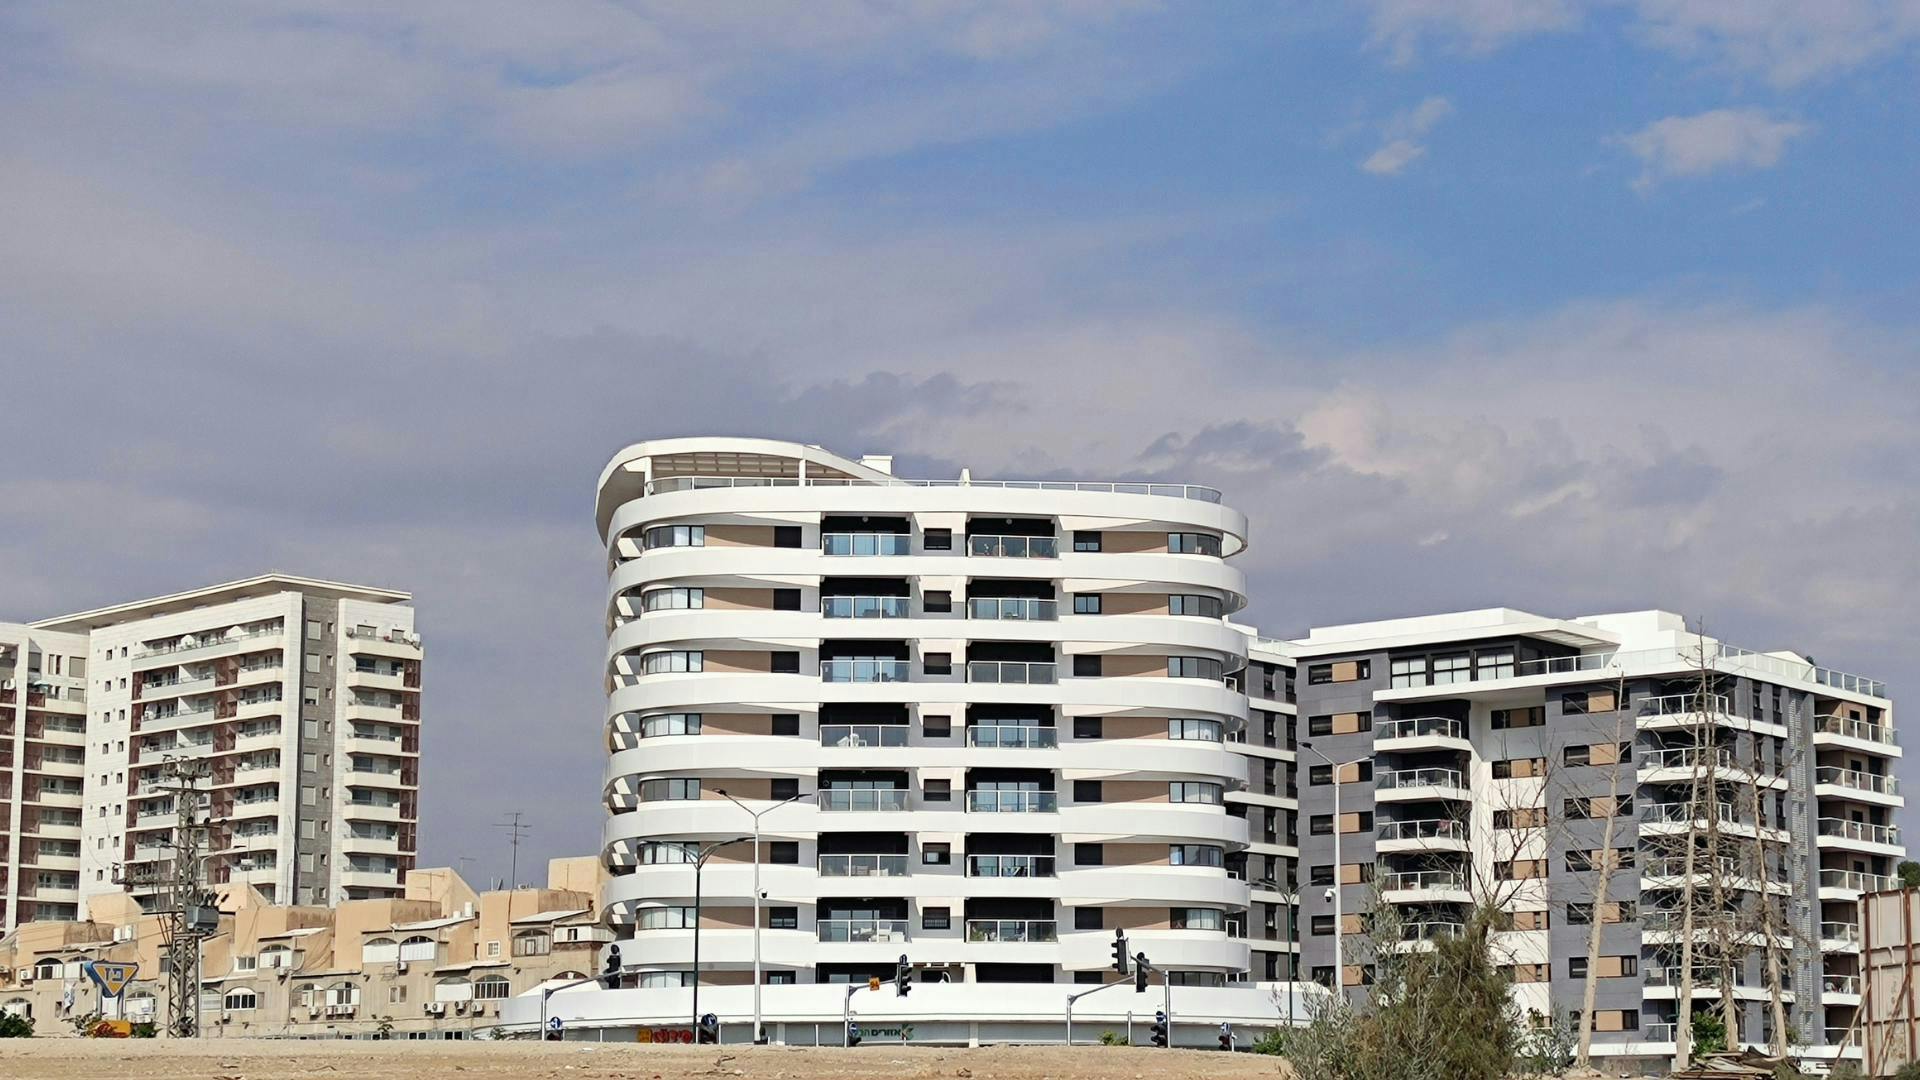 Investing in Be'er-Sheva - How and Where?
